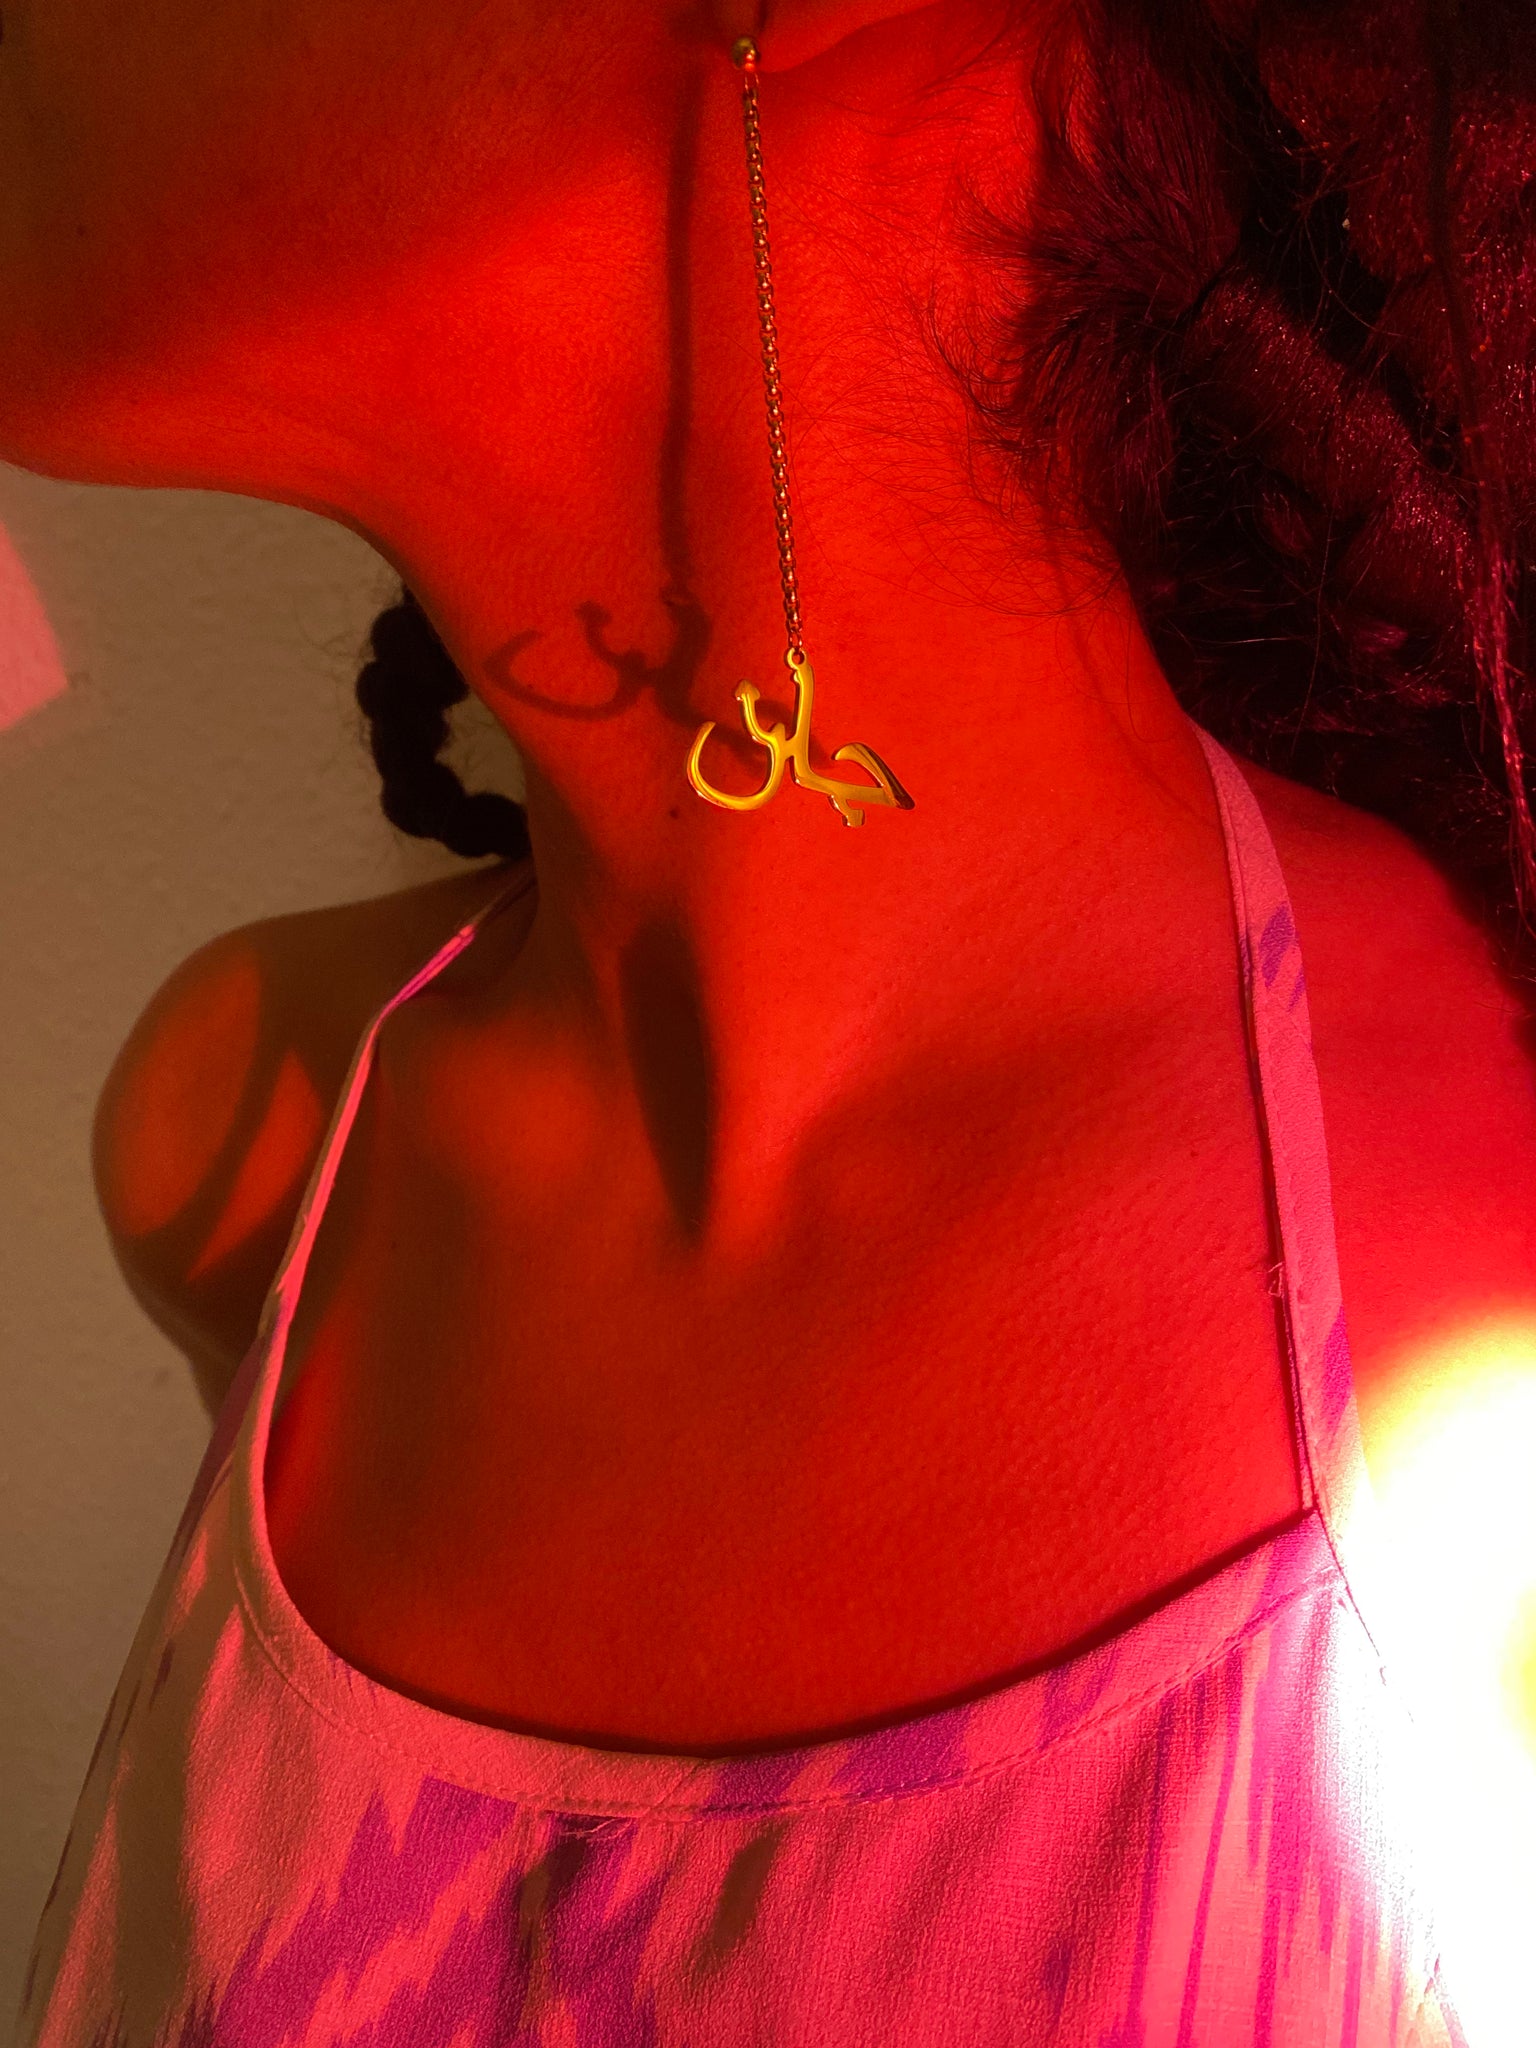 A close up of a woman's ear wearing dangly earrings with the word 'jaan' against red lighting reflecting.